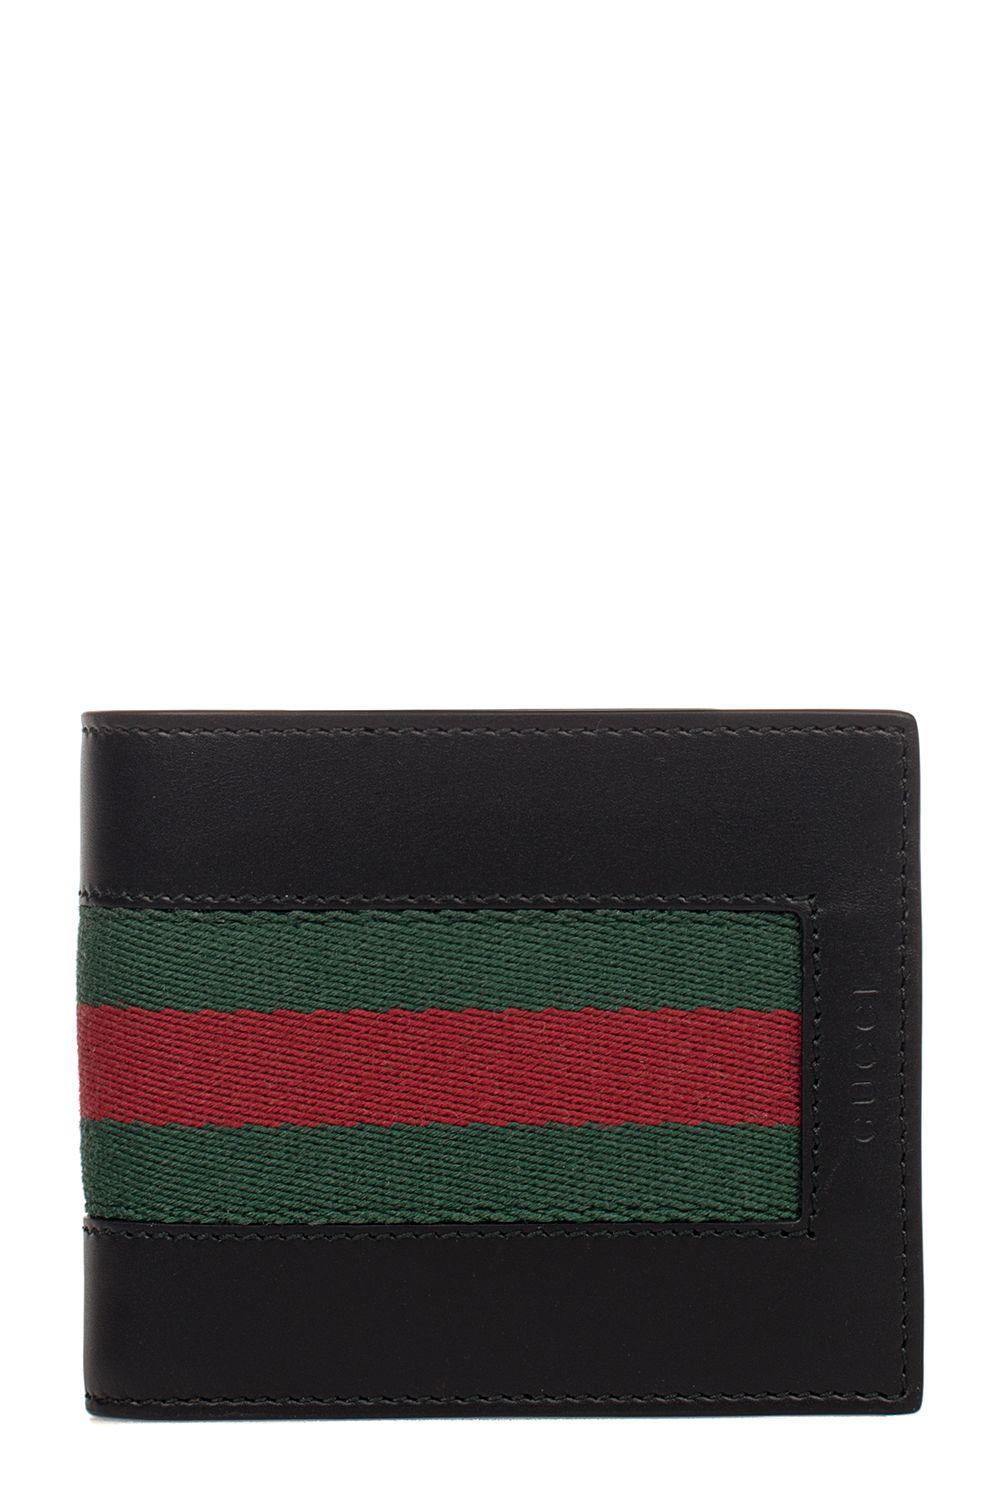 gucci wallet black green red